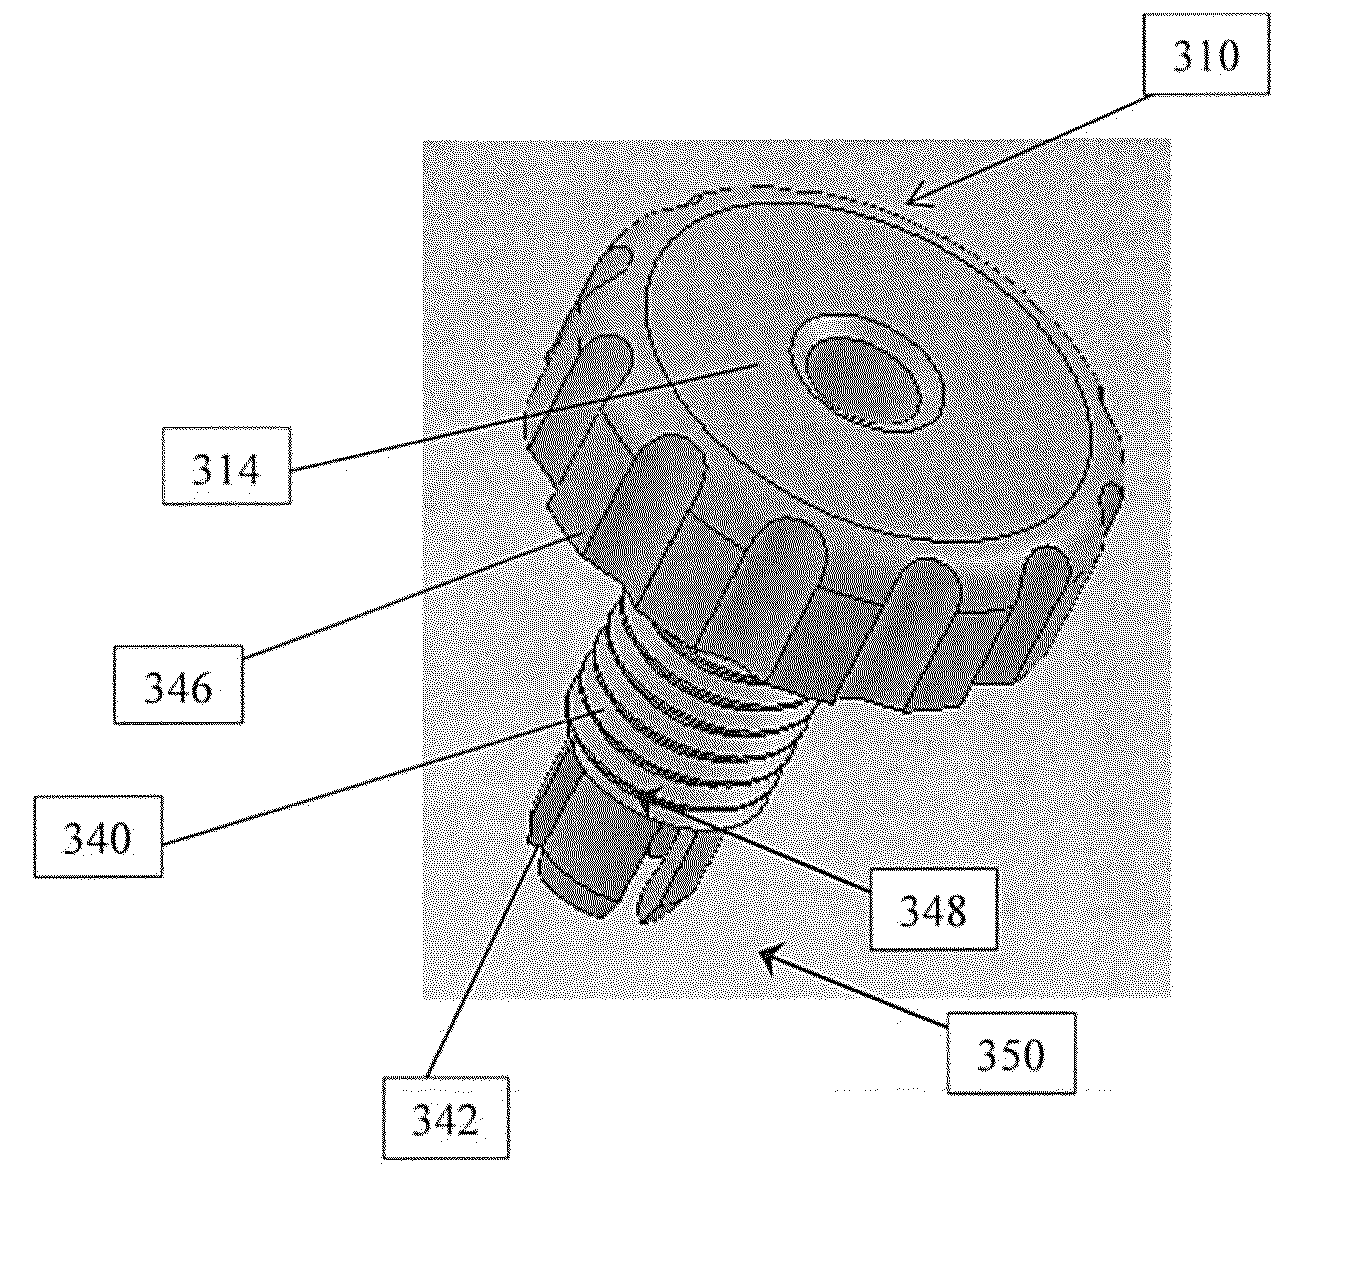 Systems and Methods for Surgical Access to Delicate Tissues